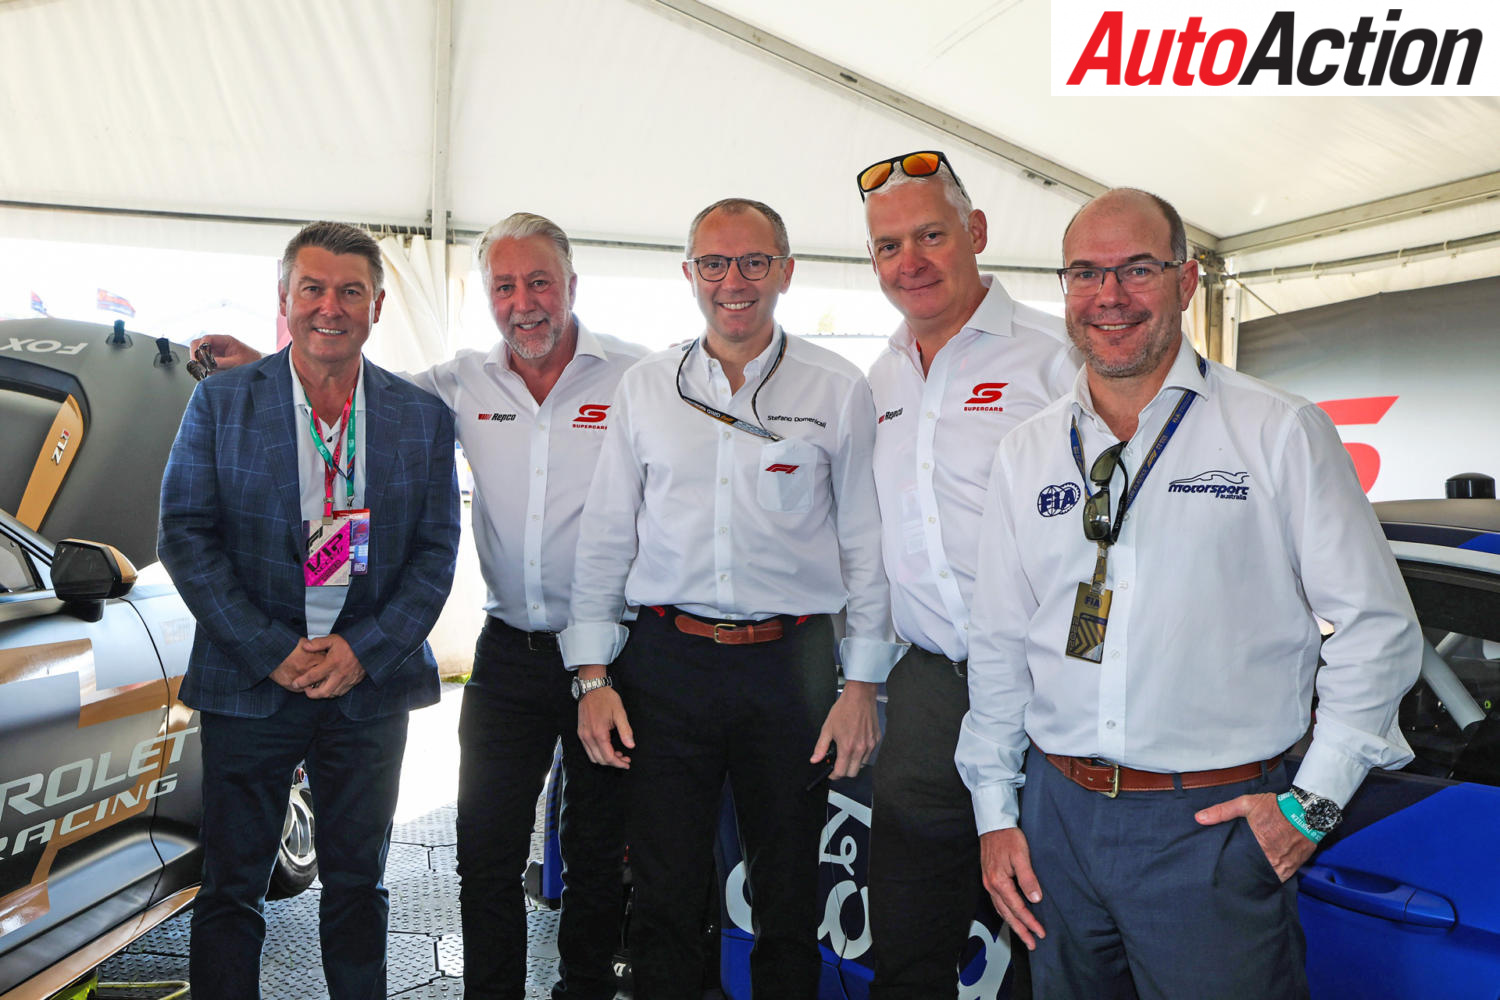 From left: Barclay Nettlefold, Supercars CEO Shane Howard, CEO of Formula One Group Stefano Domenicali, Supercars Tech Chief Adrian Burgess, and Motorsport Australia Chairman Andrew Fraser.